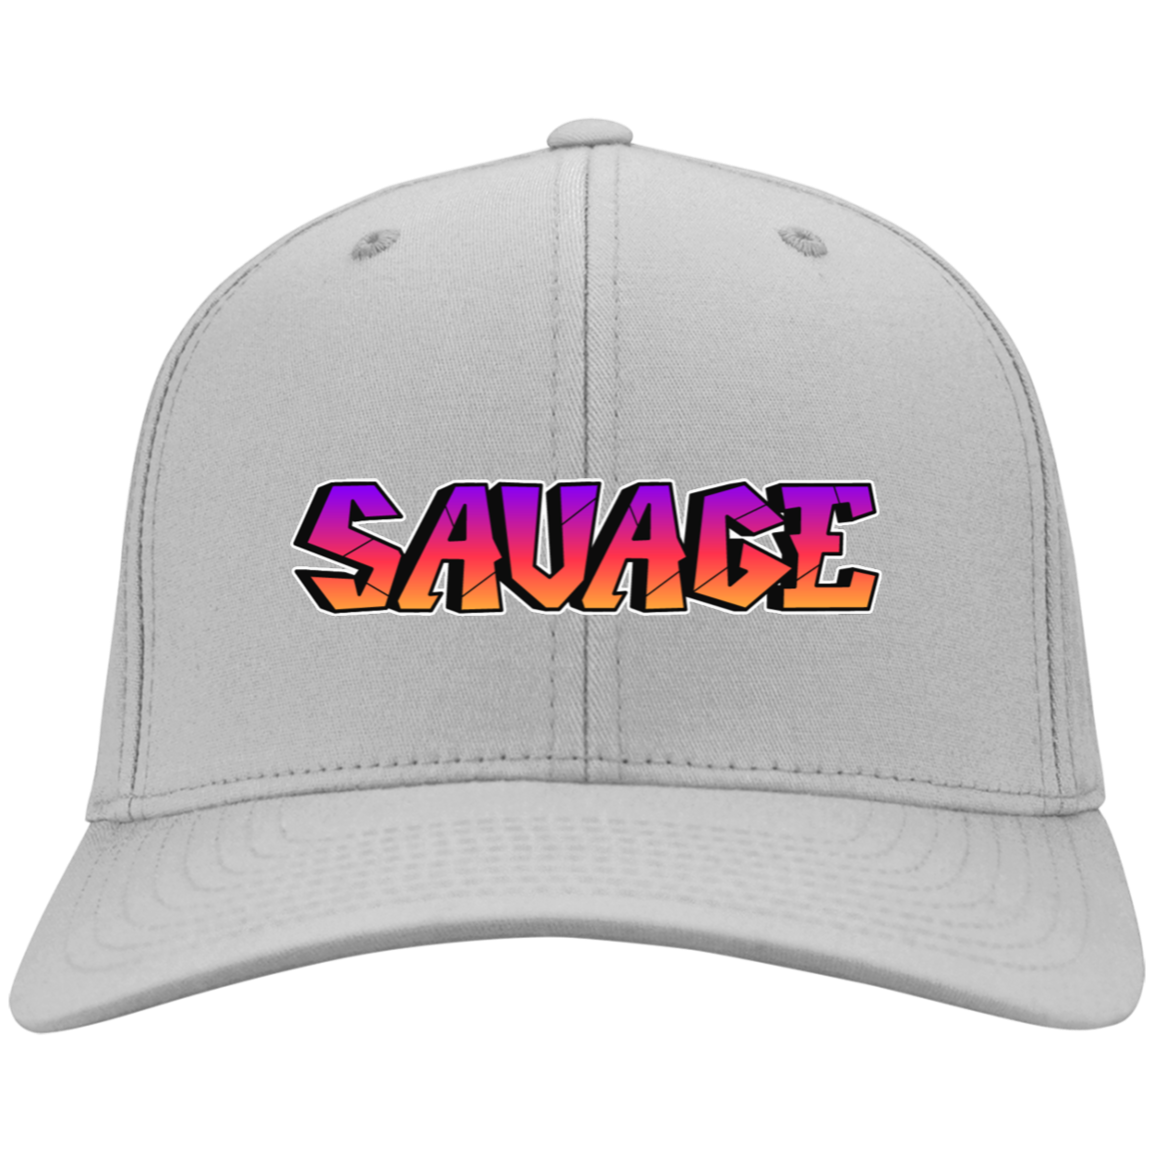 Savage Embroidered Twill Cap